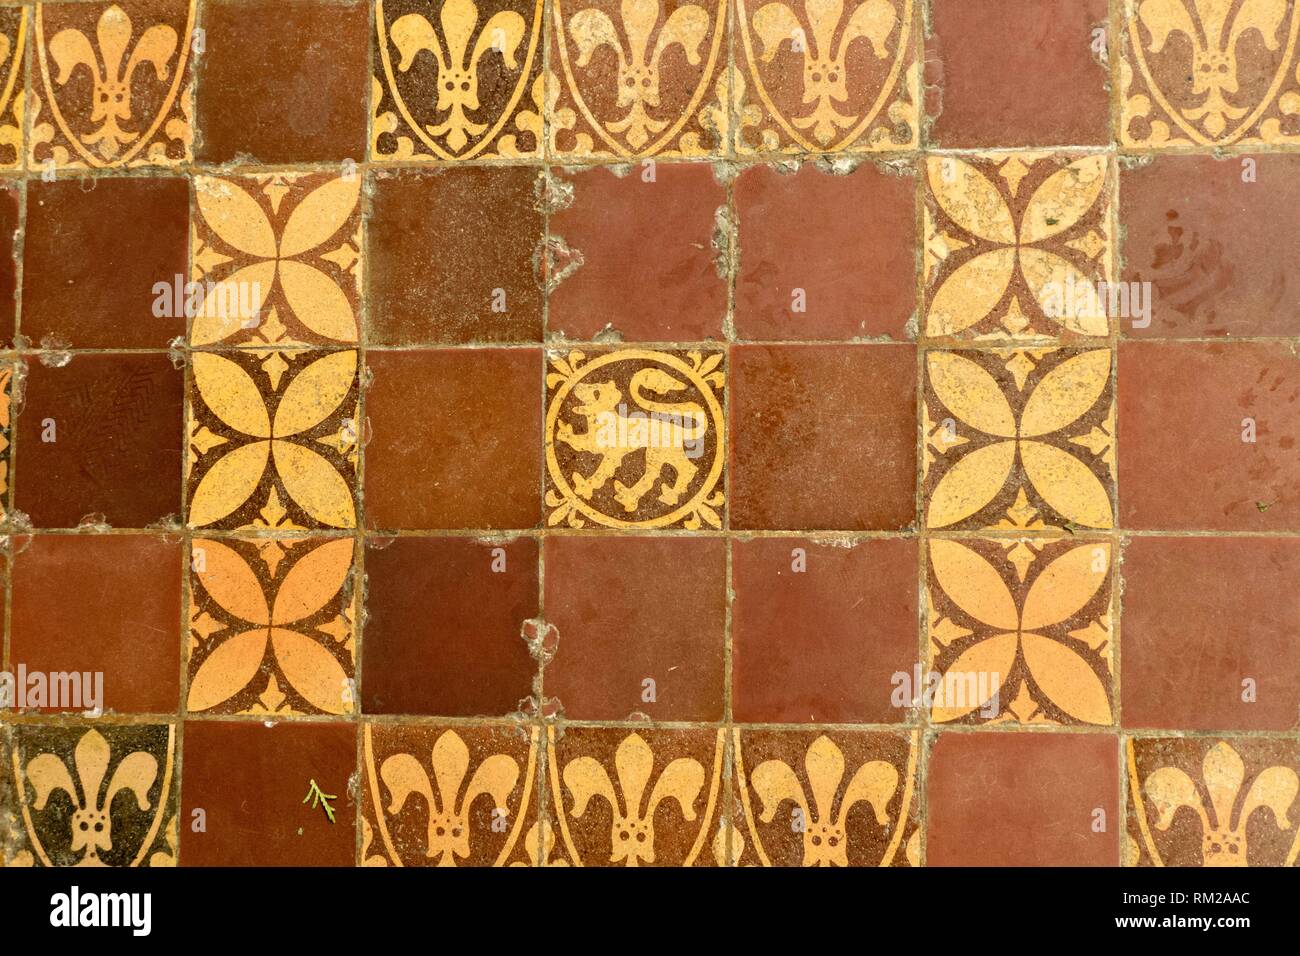 Medieval terracotta tiles showing repeating geometric patterns and fleur de lis and lions passant heraldic motifs in Hereford Cathedral, Hereford, Stock Photo